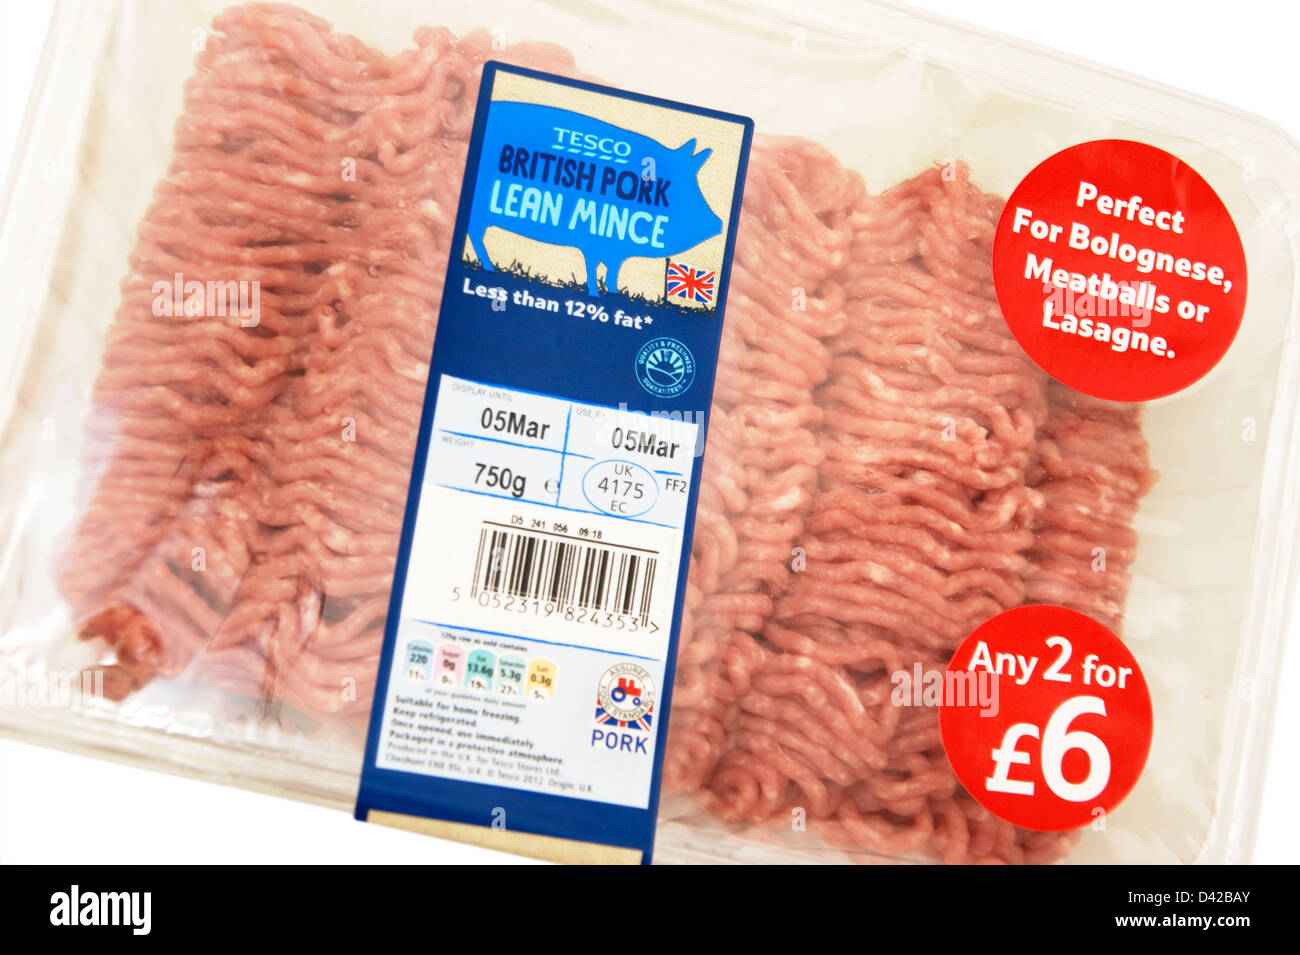 Tesco BRITISH pork lean mince healthy eating with the British logo & the little red tractor sign symbol on an offer of 2 for £6 Stock Photo